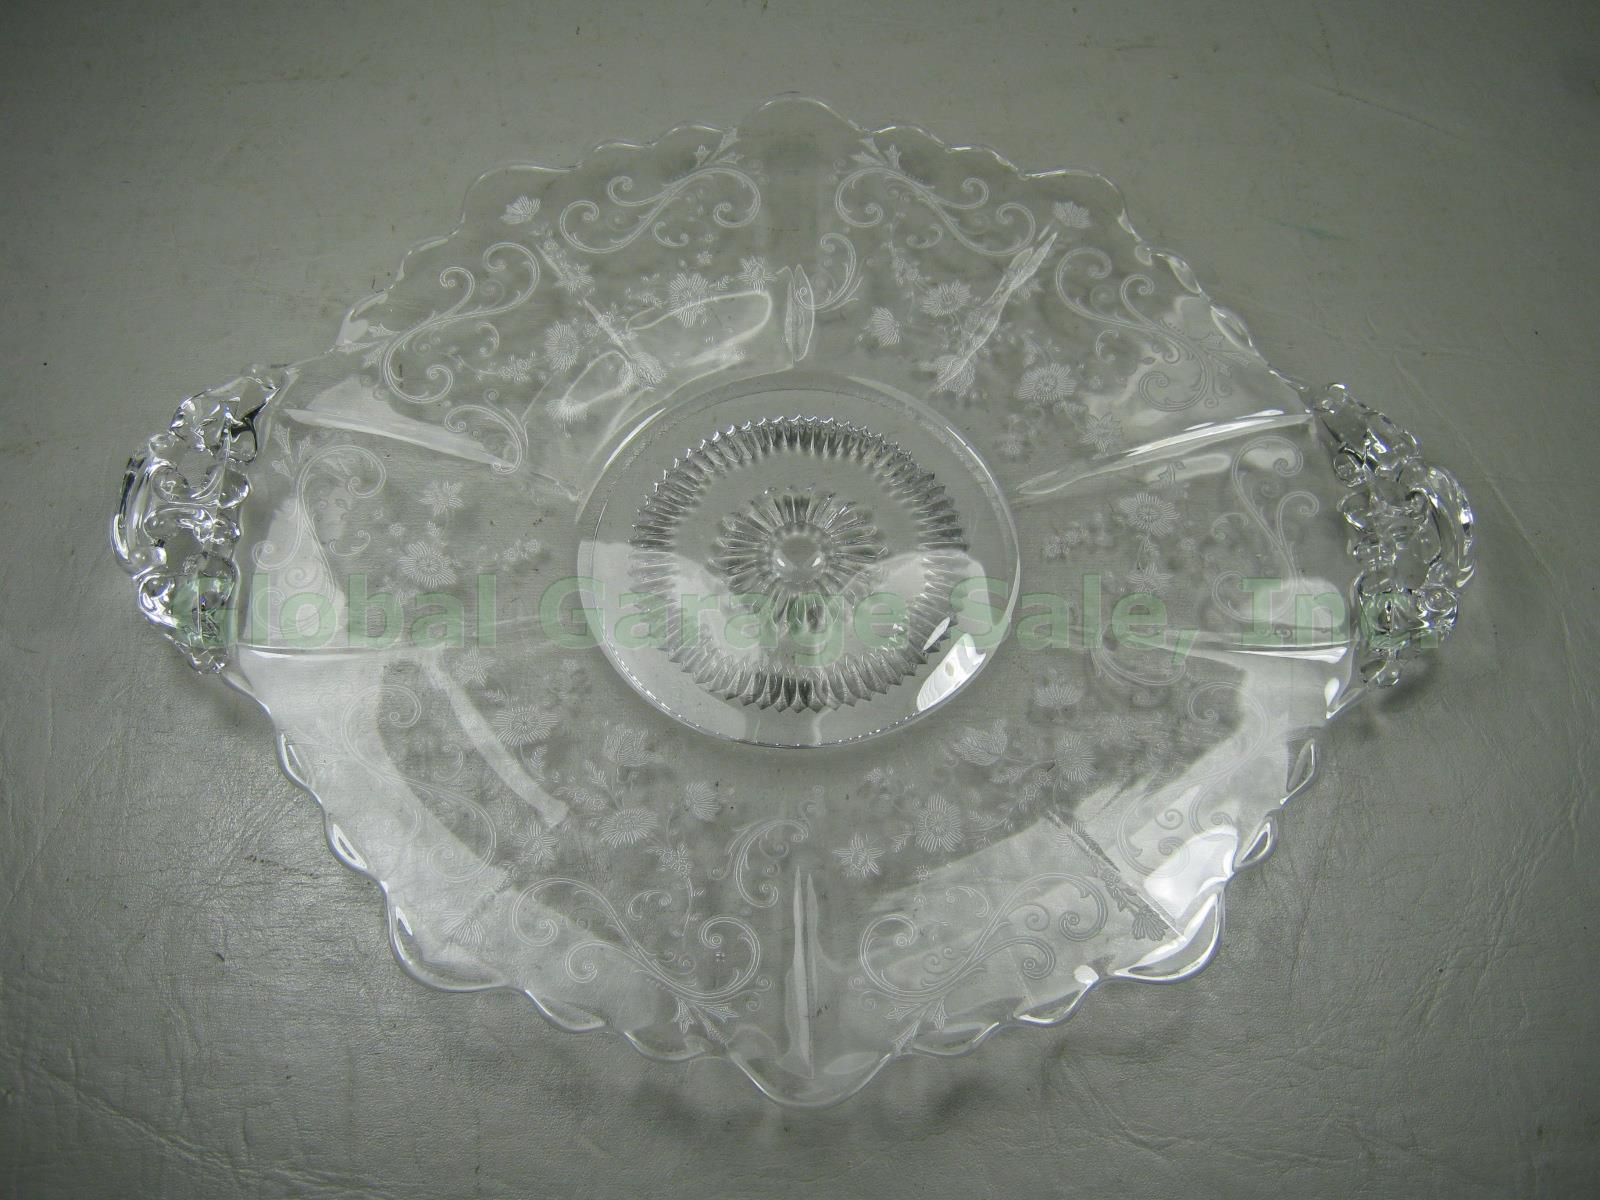 Cambridge Chantilly Etched Glass Serving Bowl Dish Handled Cake Plate Platter NR 2